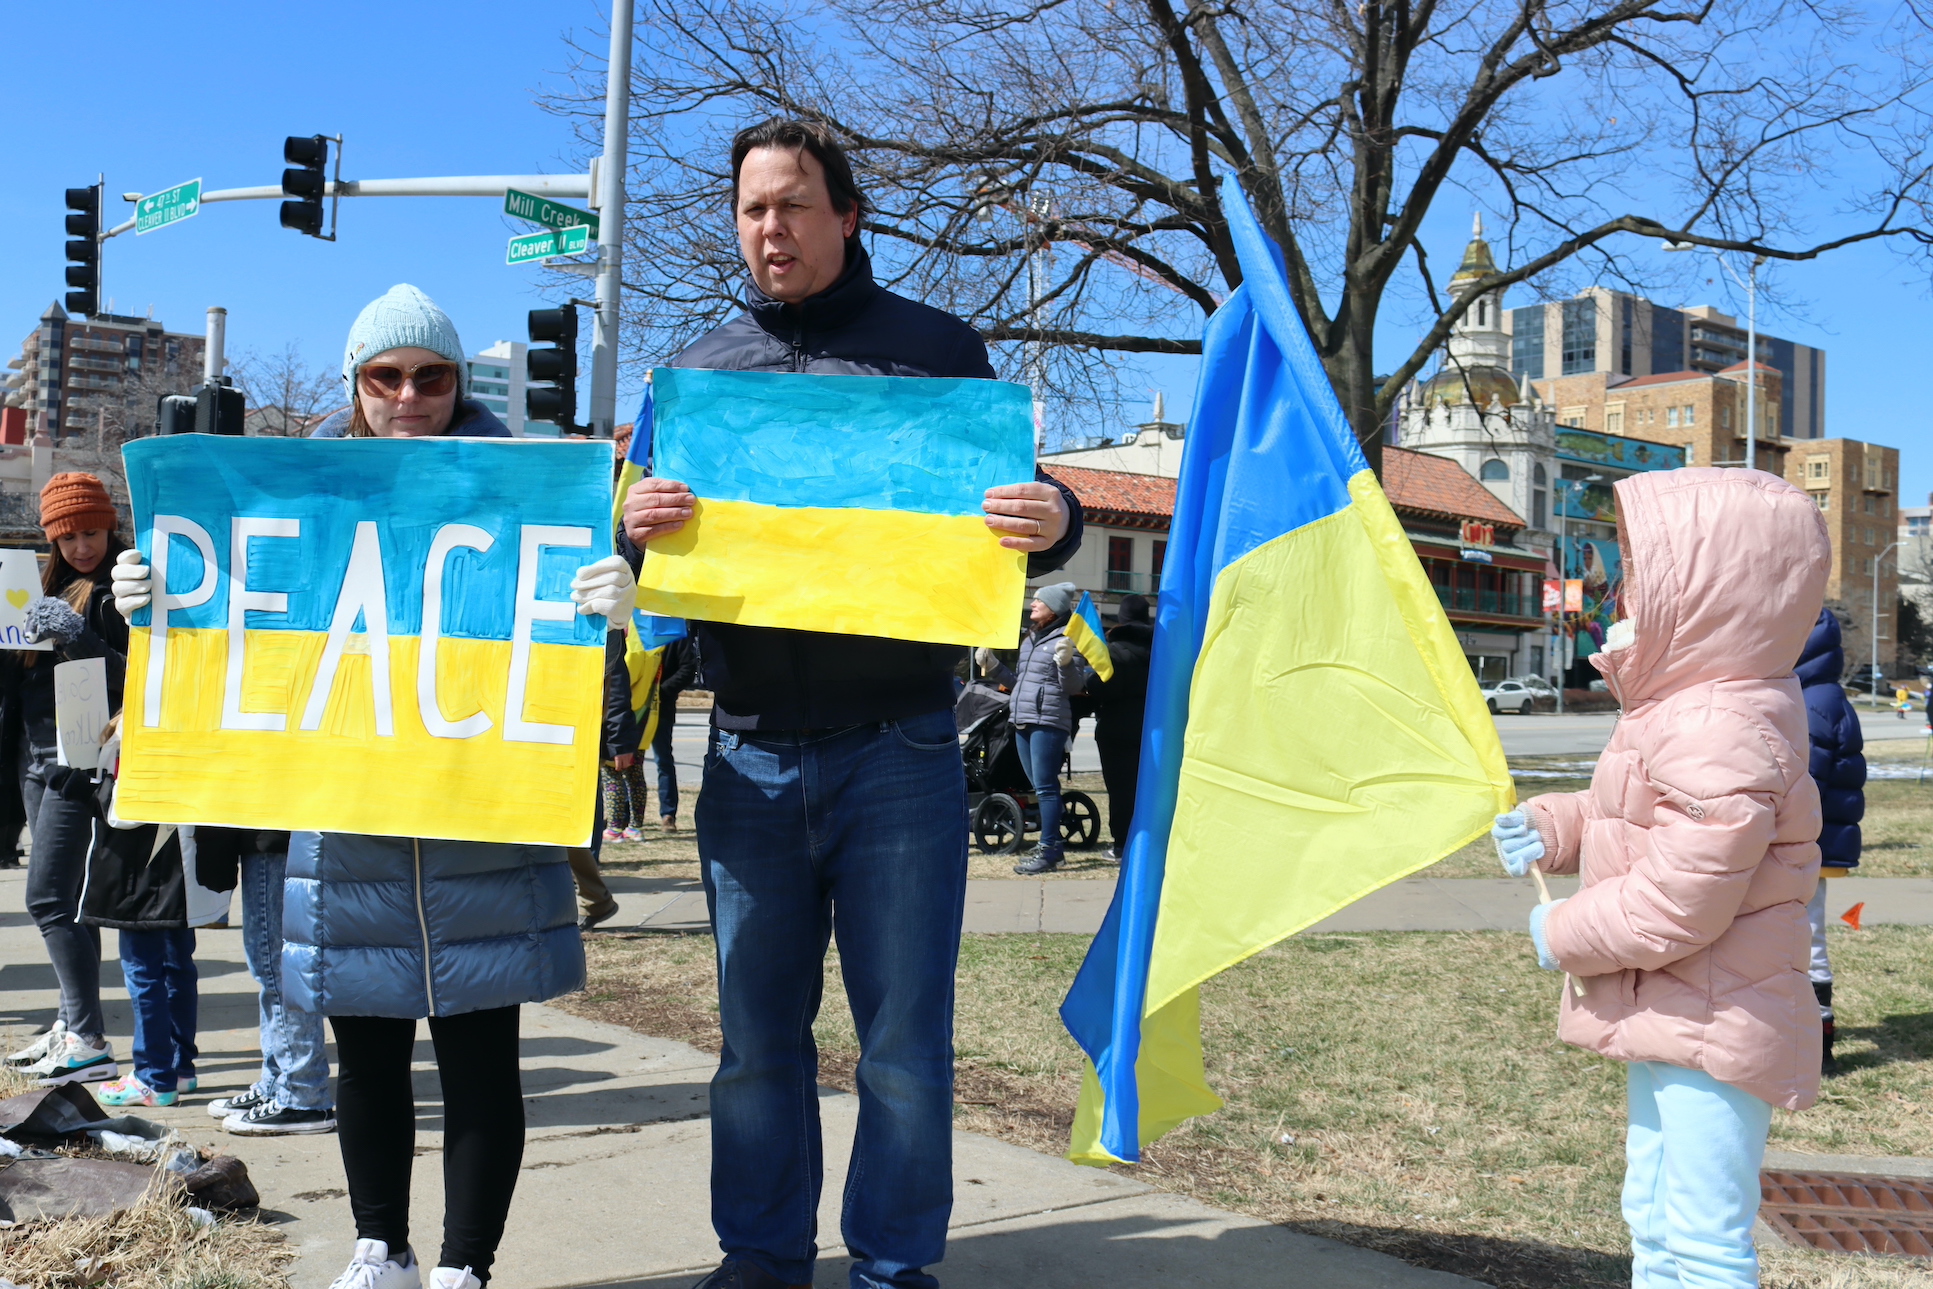 Woman hols poster that reads "peace" next to tall man holding a poster of Ukraine's flag. A young girl in a pink coat holds a Ukrainian flag on a pole.